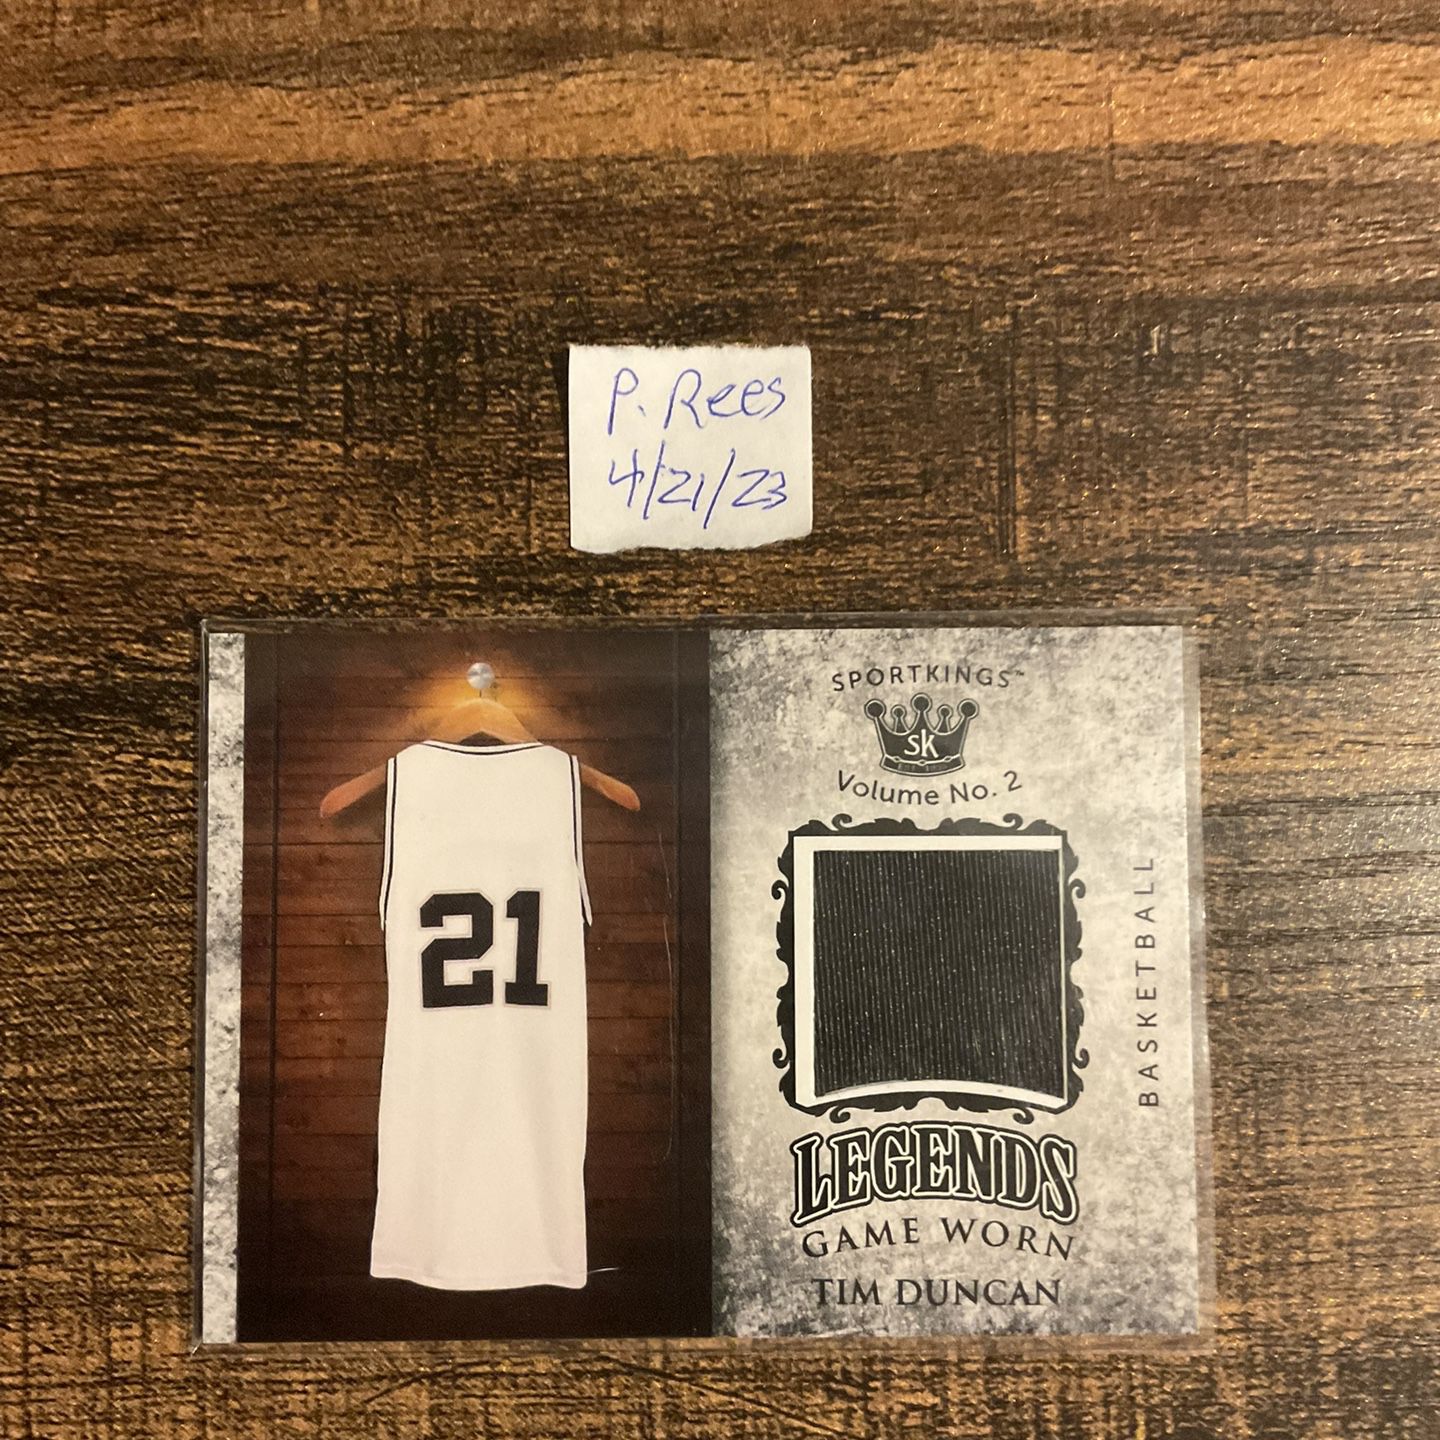 Tim Duncan Game Worn Jersey Patch 2017 for Sale in Scottsdale, AZ - OfferUp